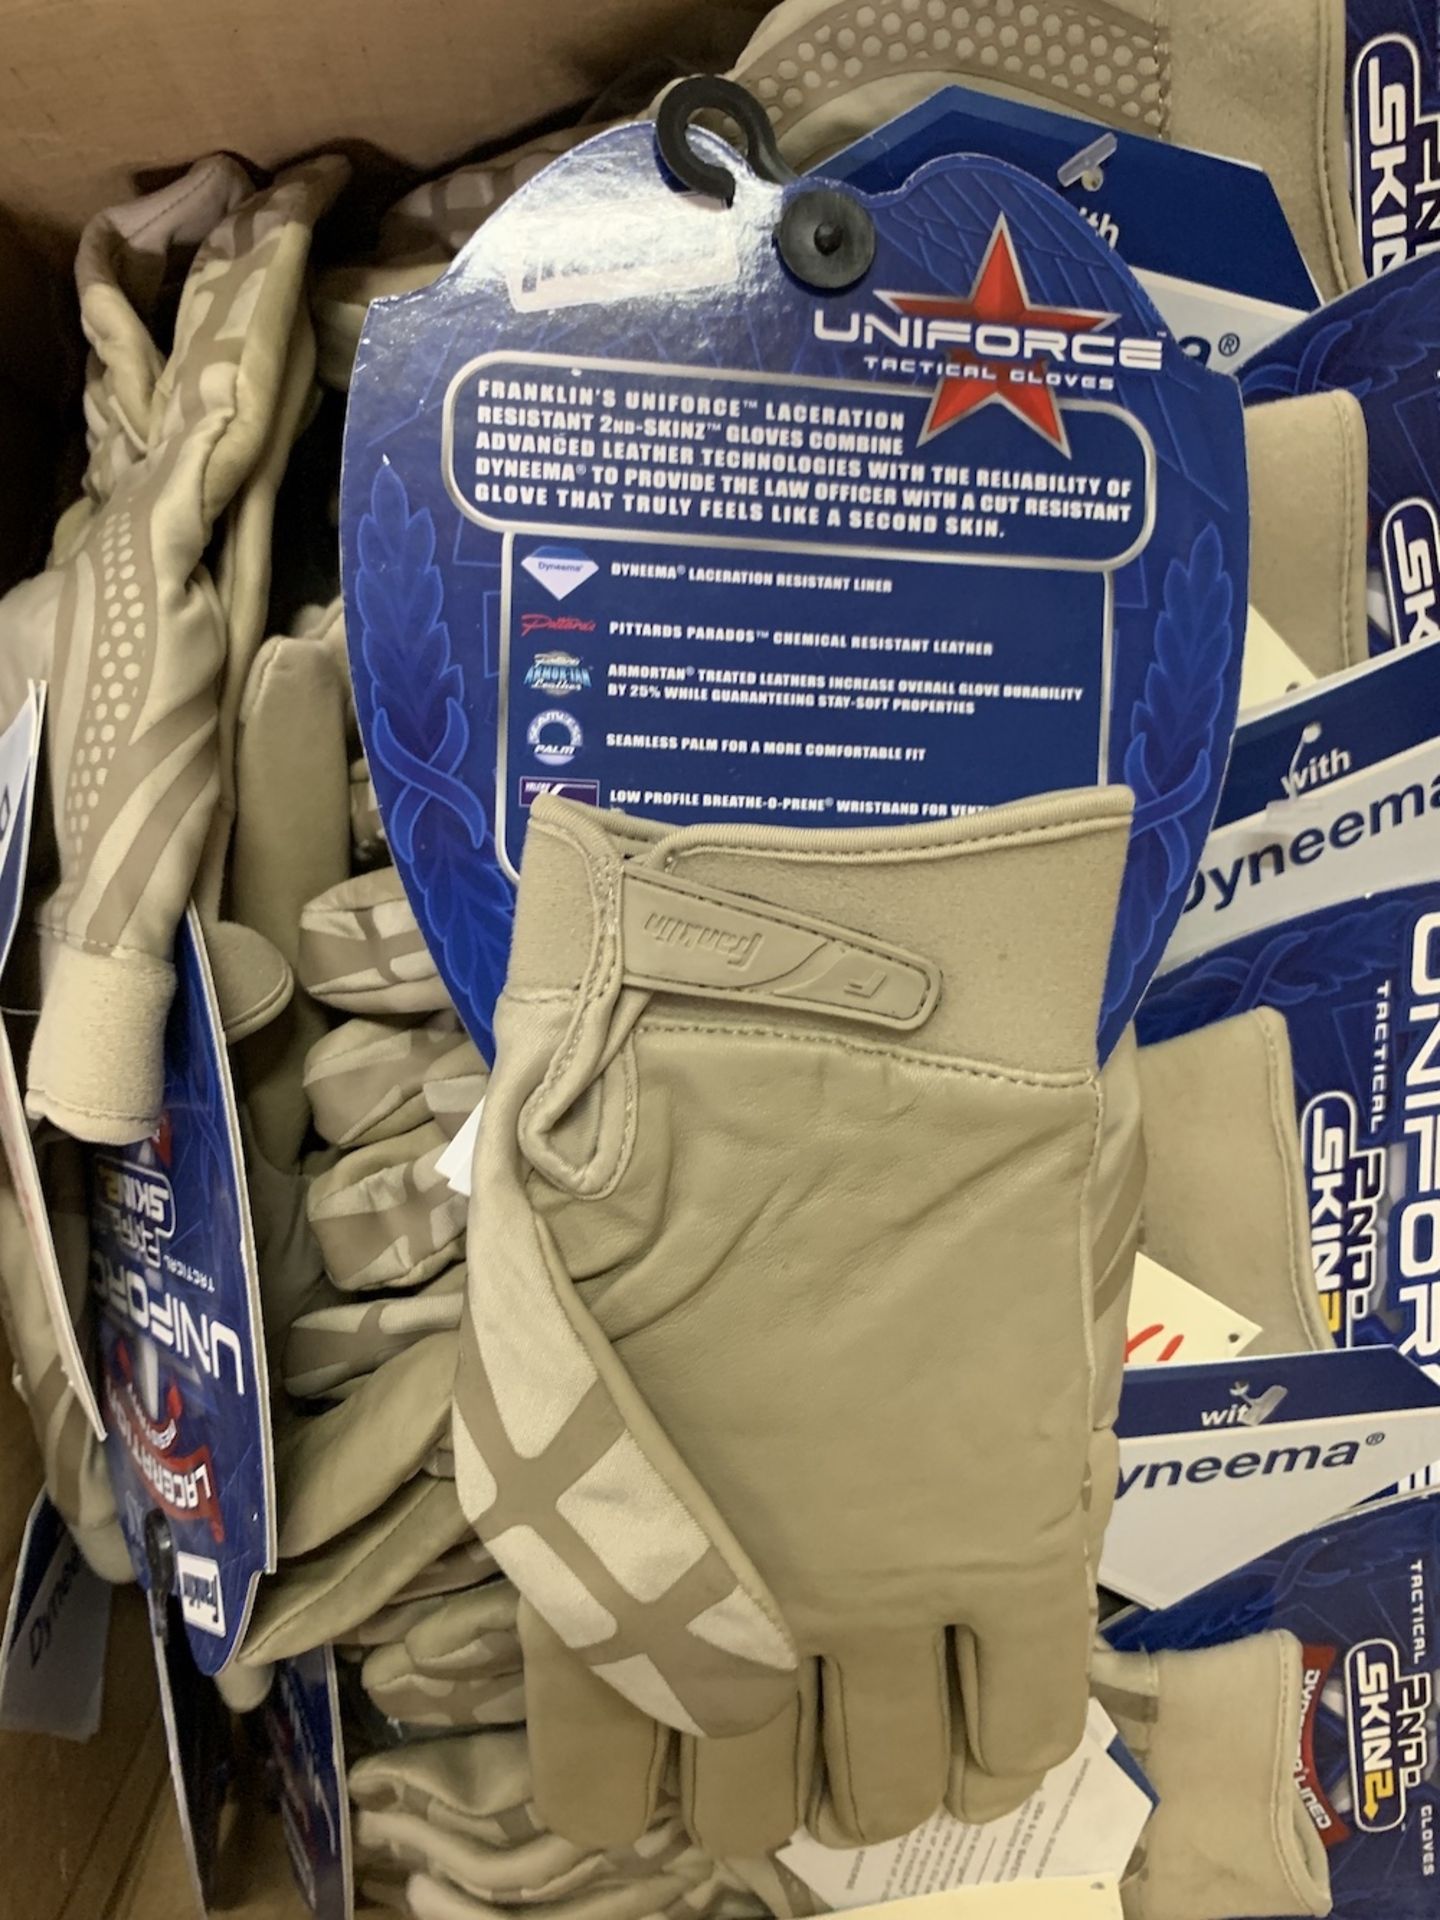 37 Pairs of Franklin Laceration Uniforce Gloves, High Performance 2nd Skin2 XS/S, Tan, New - Image 4 of 5